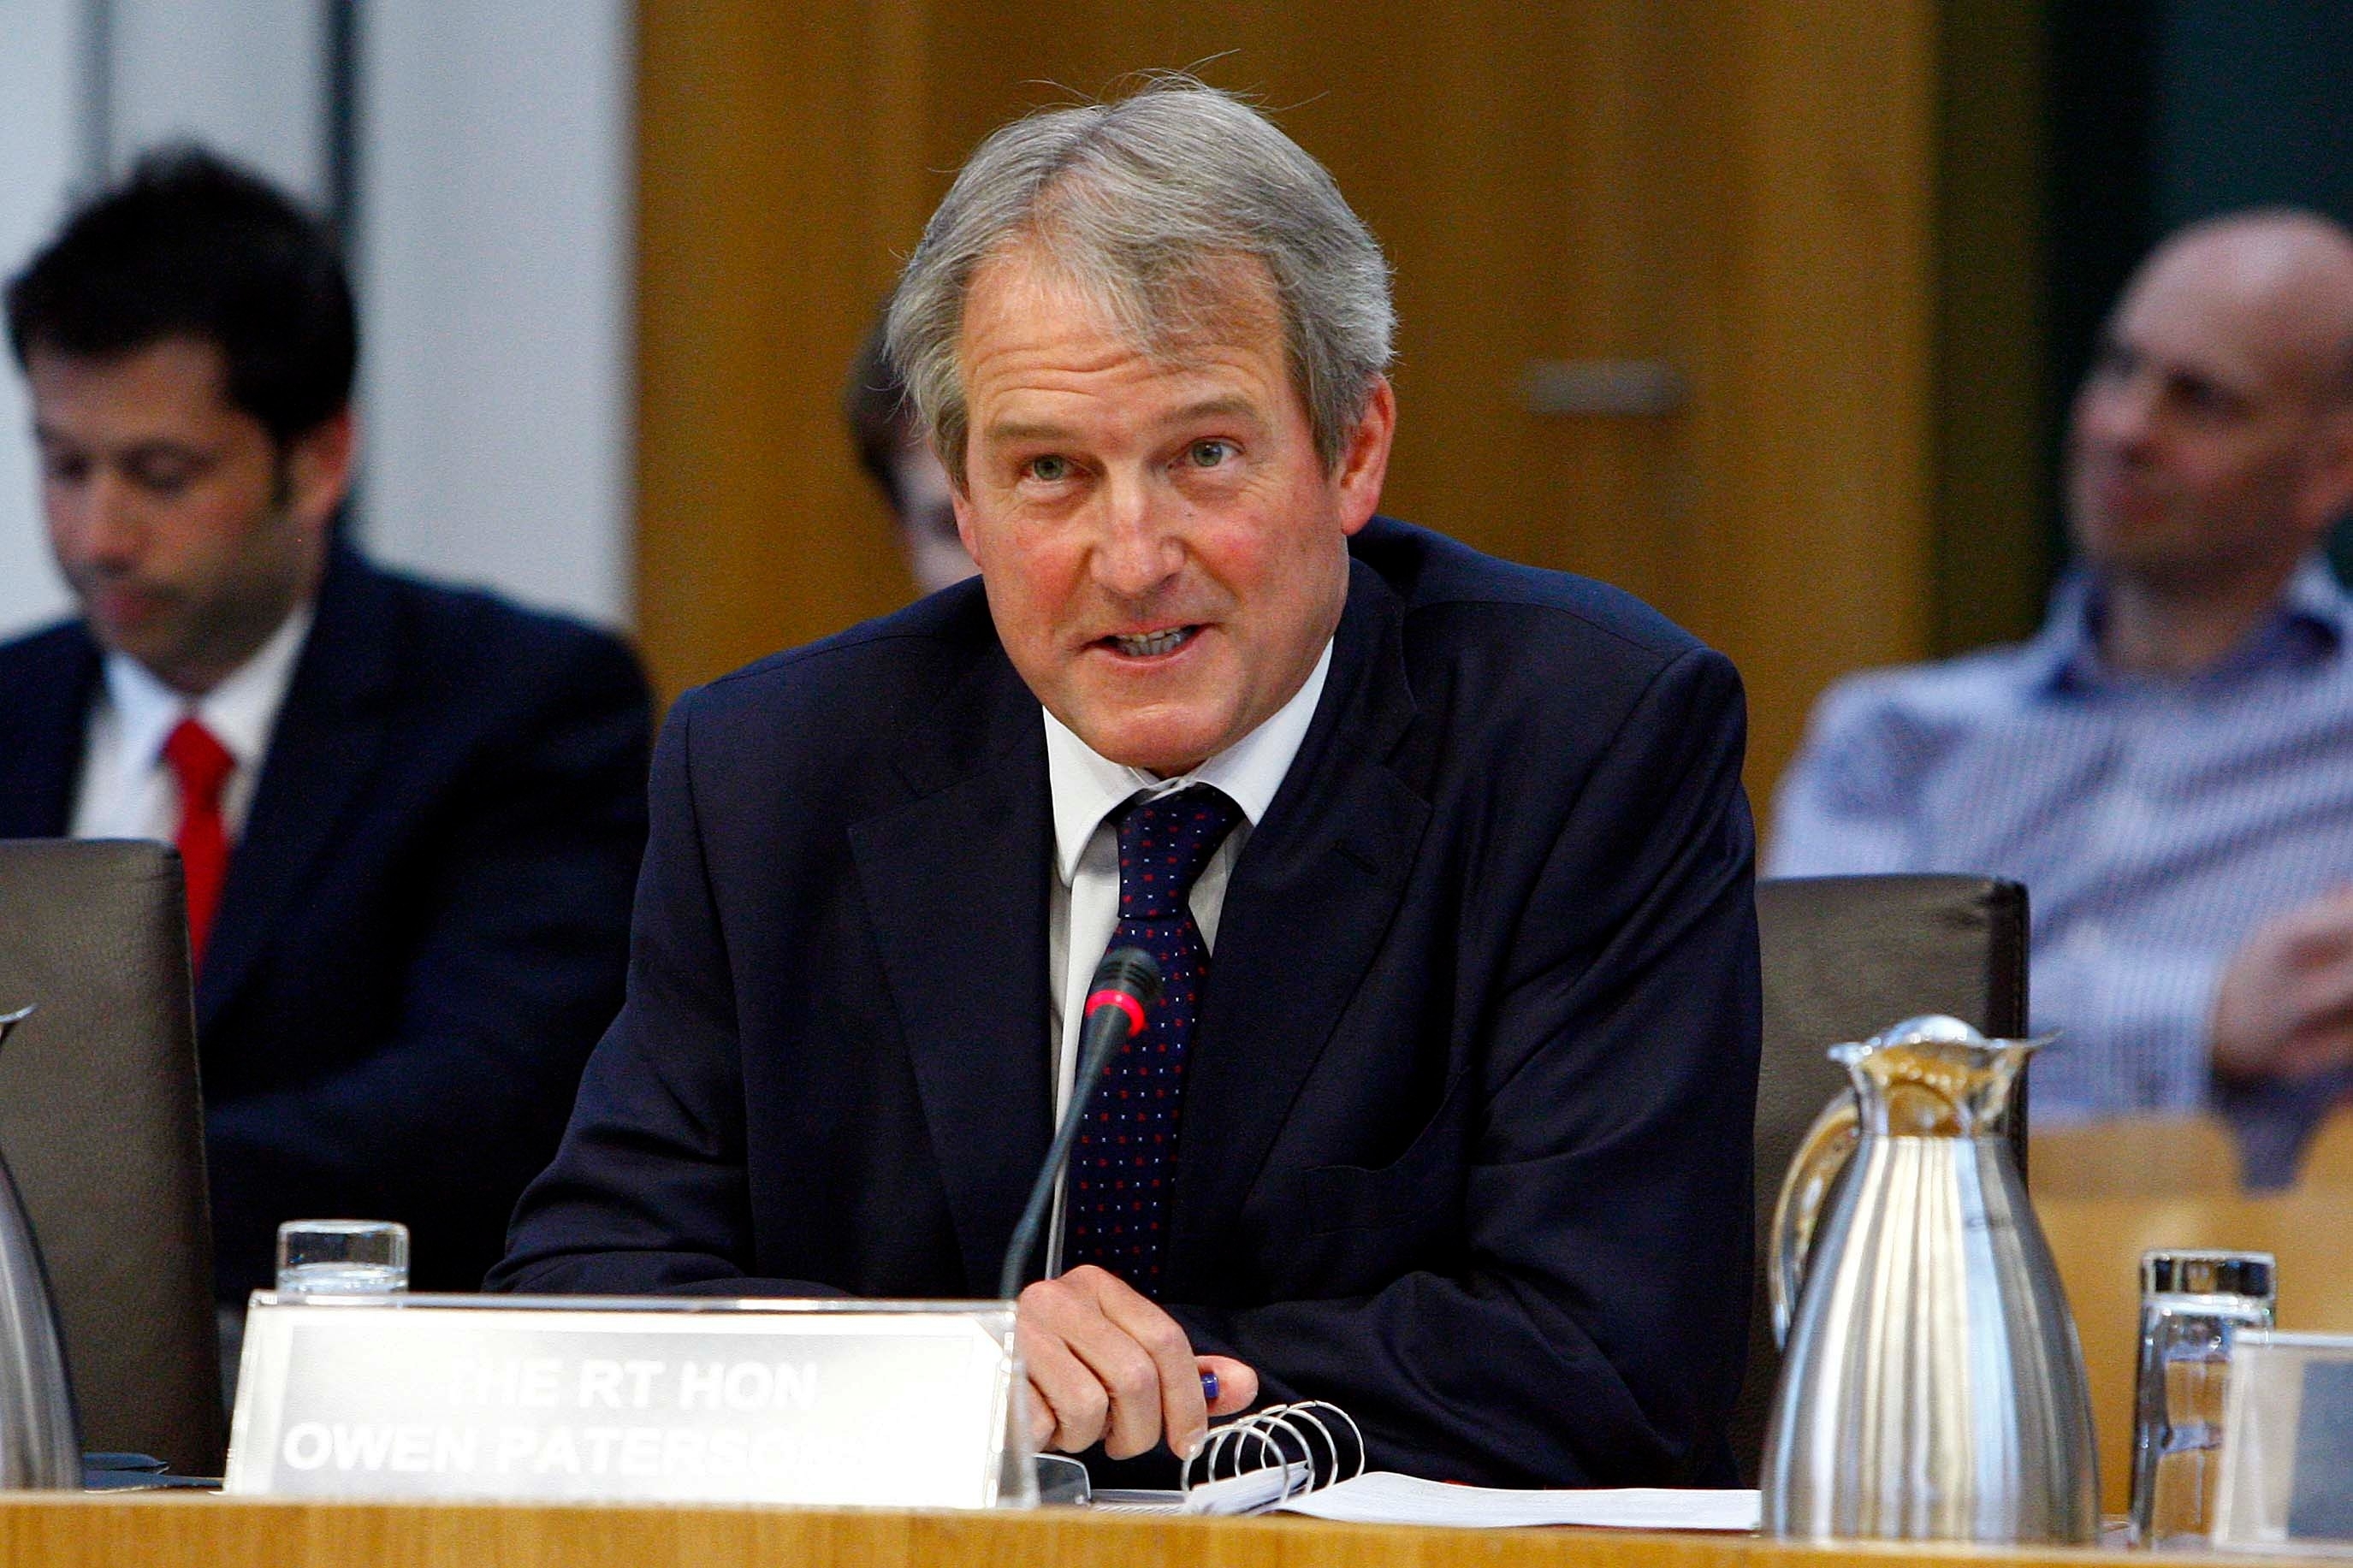 The Rt Hon Owen Paterson MP, Secretary of State for Environment, Food and Rural Affairs, UK Government gives evidence to the Scottish Parliament Rural Affairs, Climate Change and Environment Committee